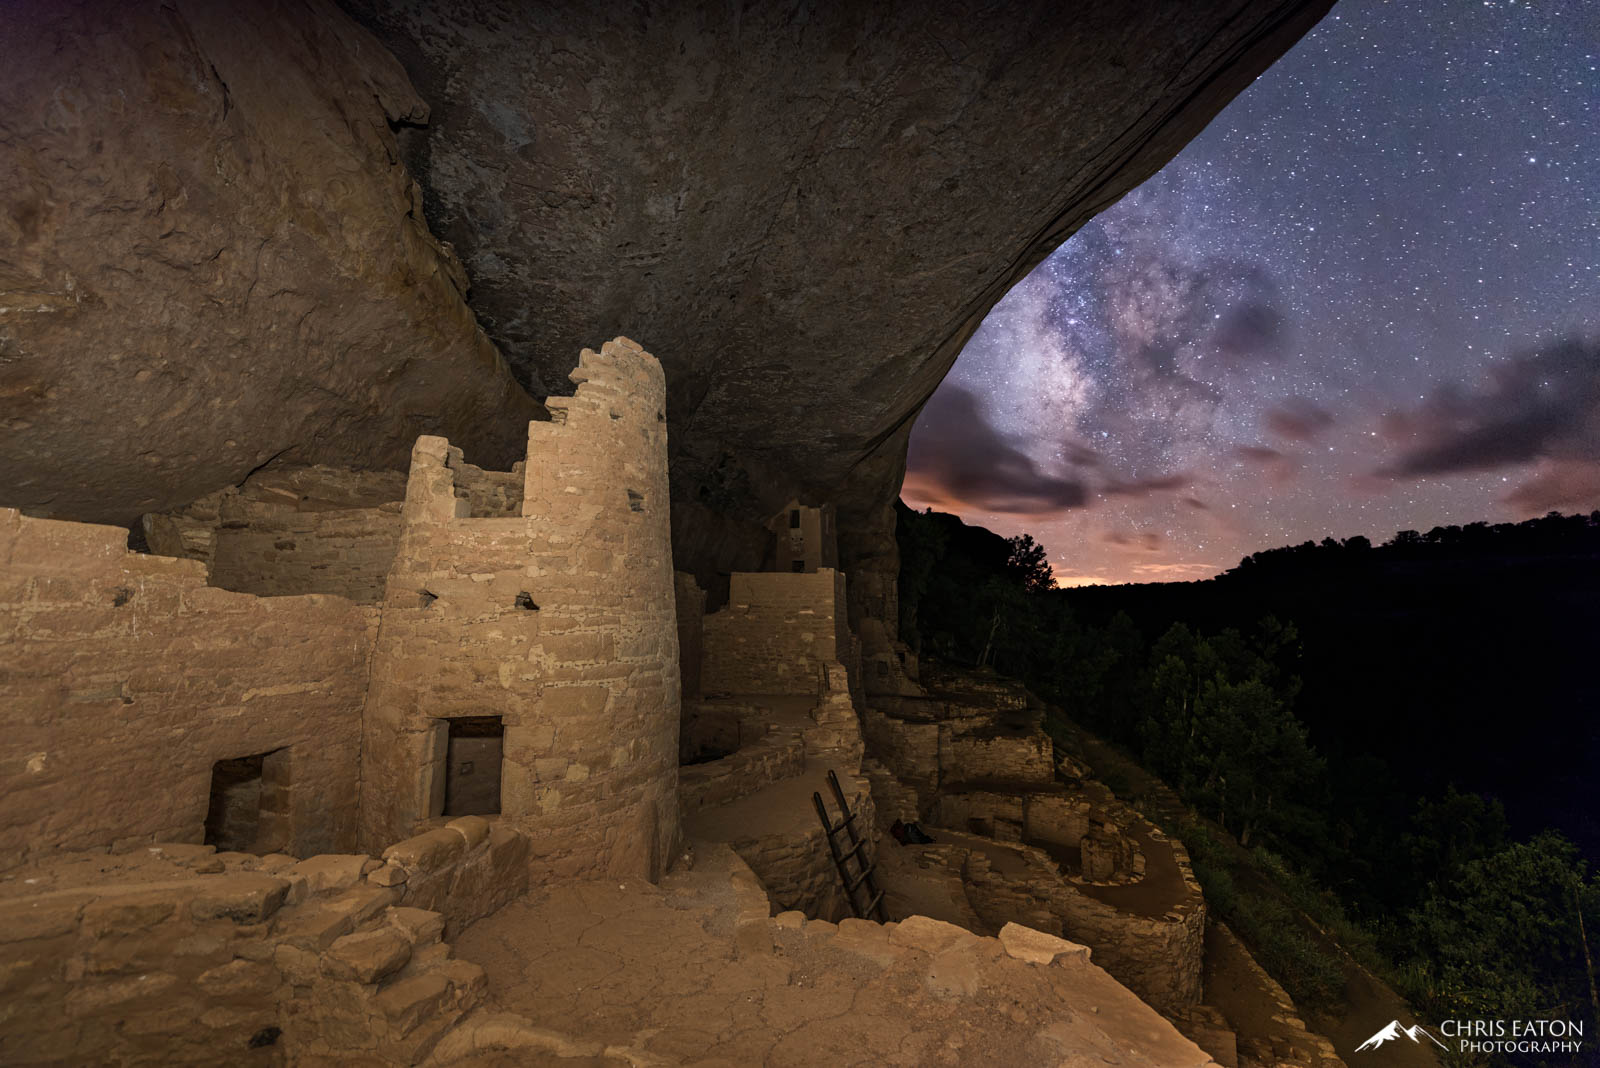 Looking out from Cliff Palace at the Milky Way galaxy in Mesa Verde National Park.